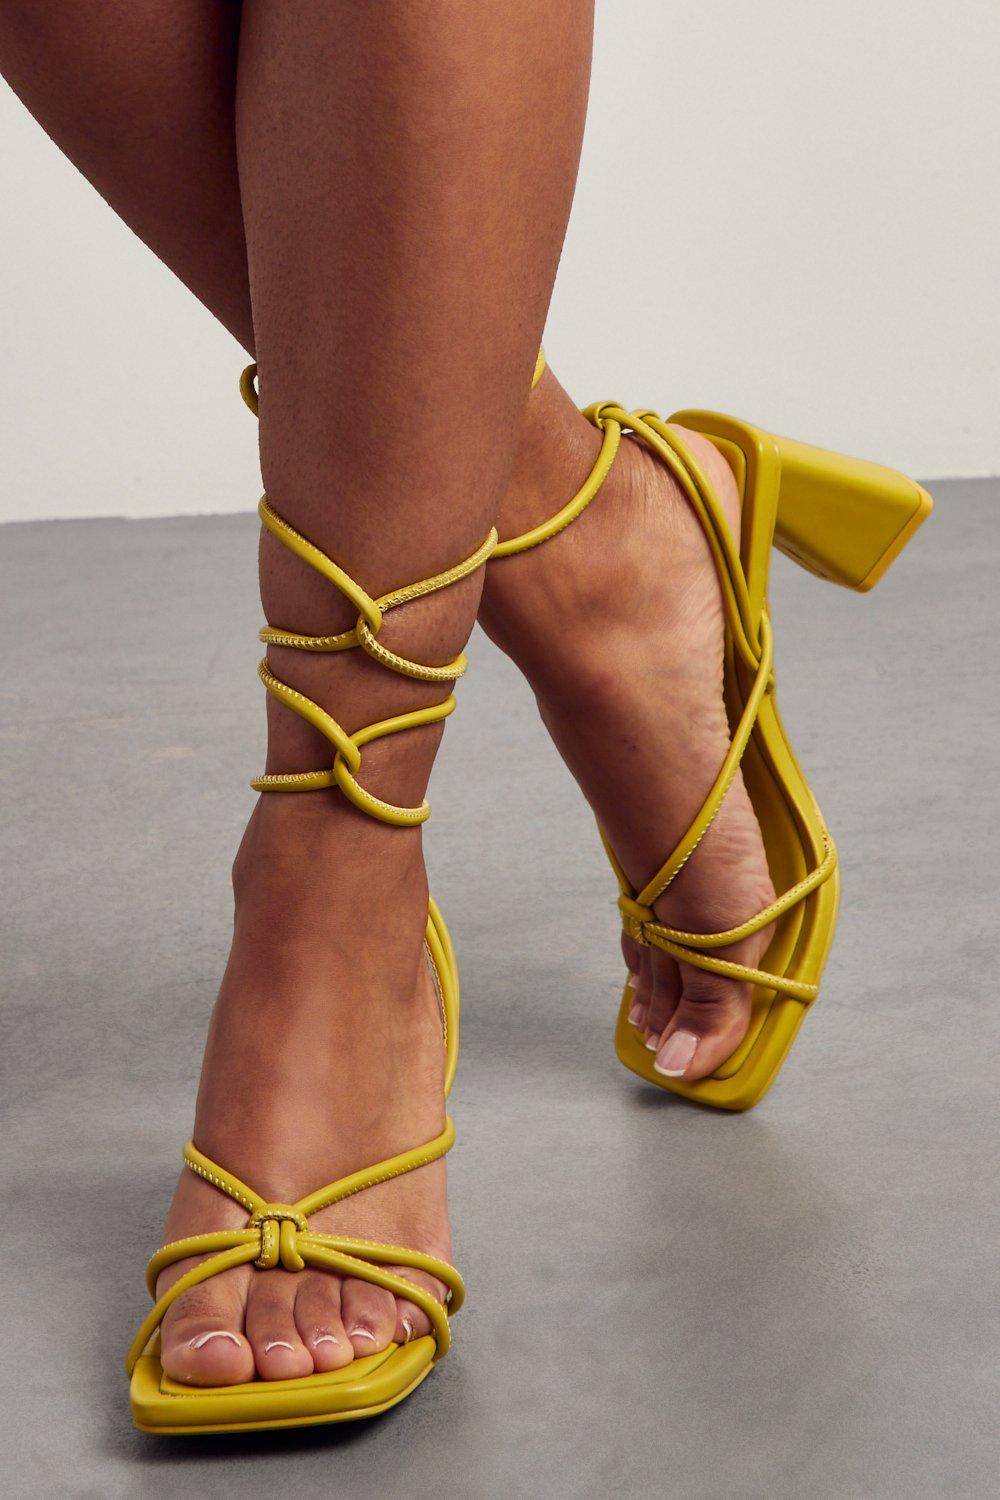 Womens Block Heel Strappy Mid Heels - lime - 4, Lime